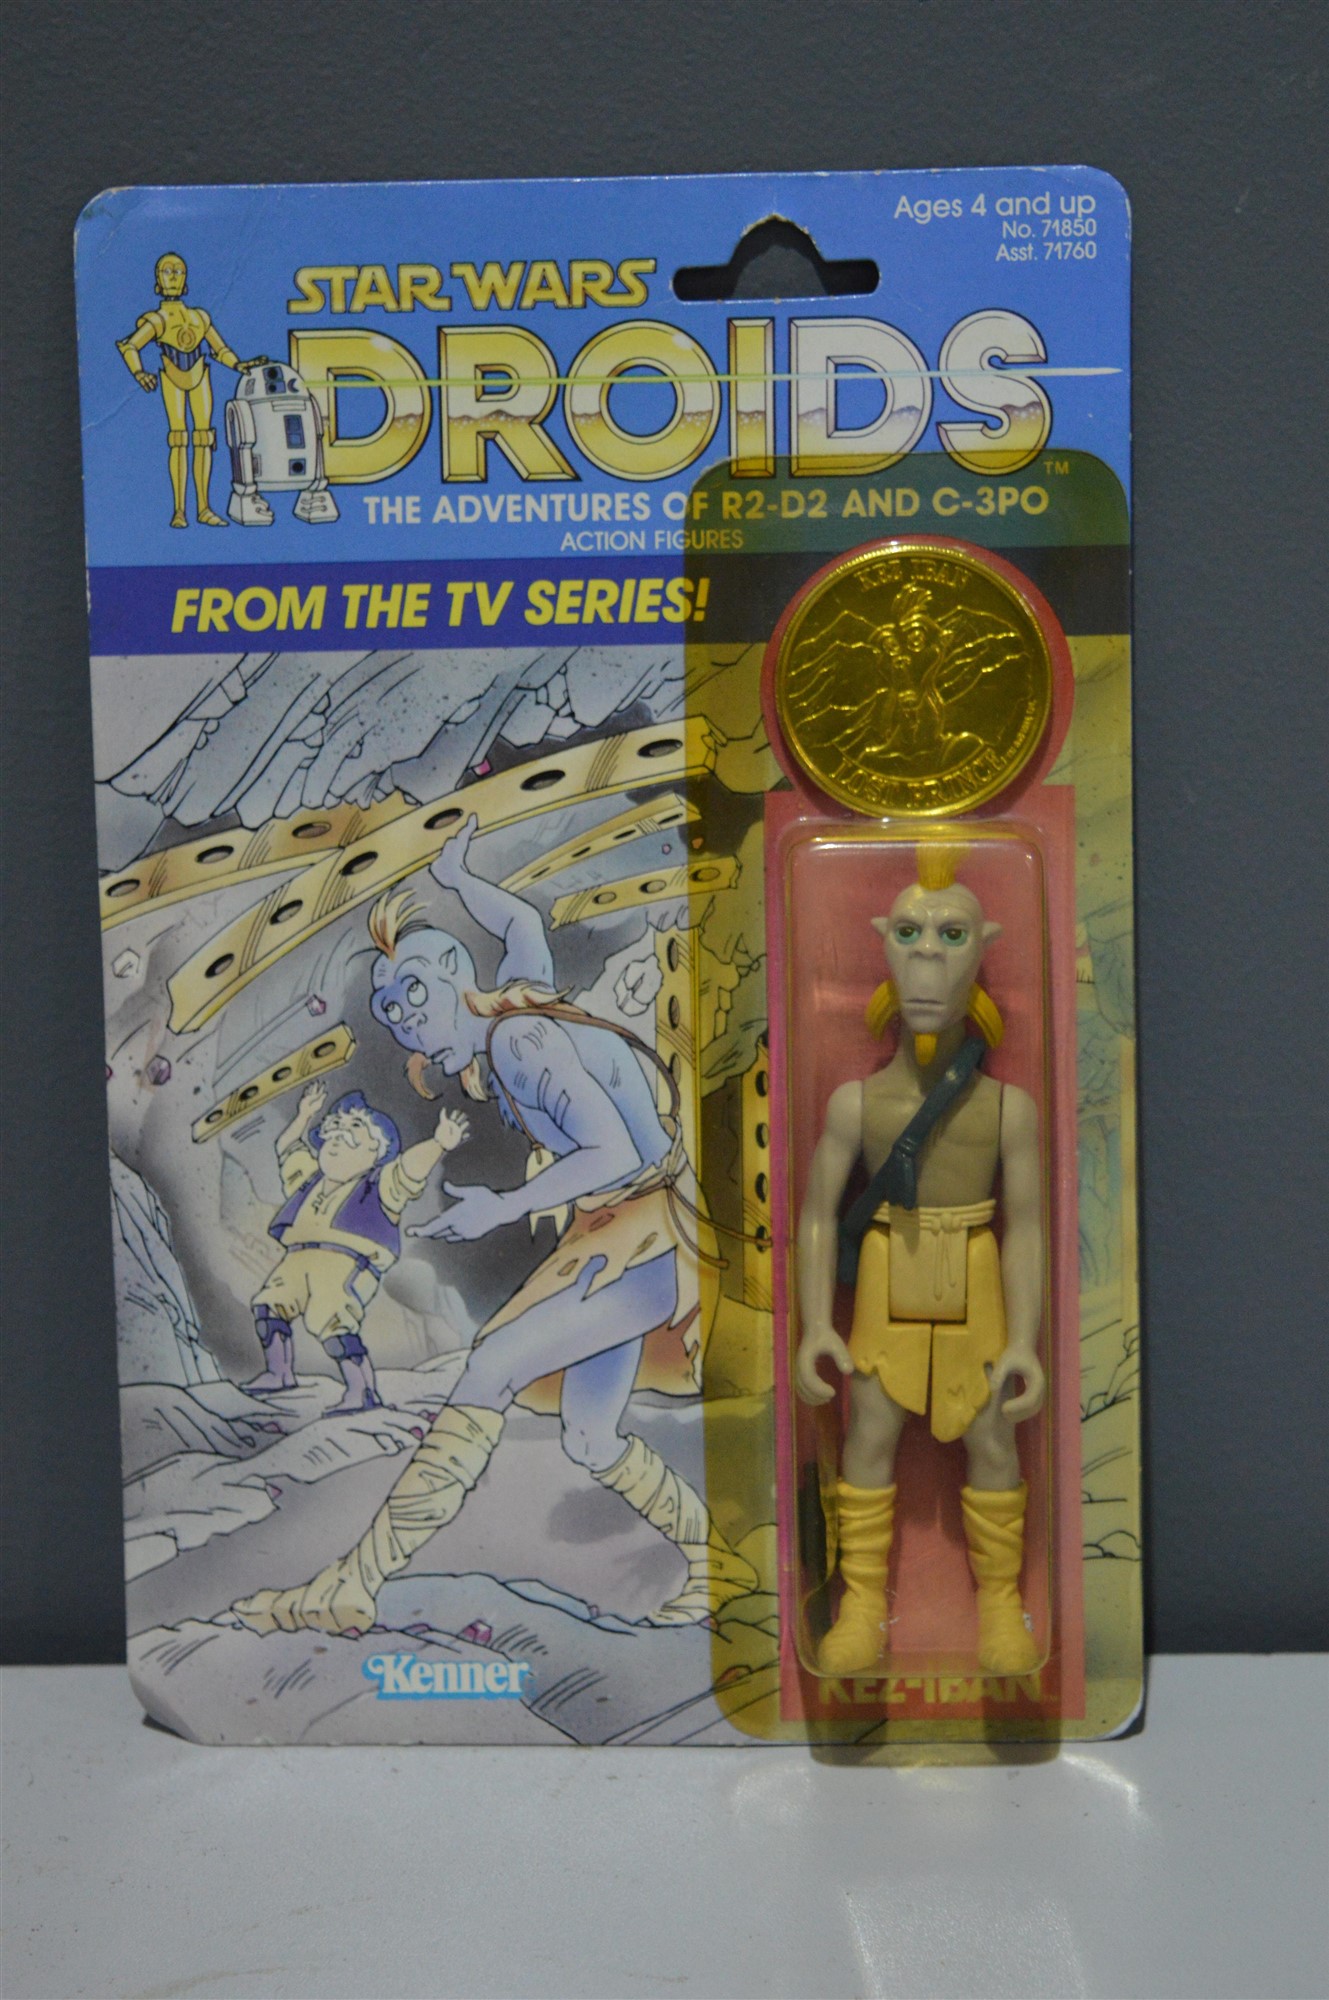 Star Wars Droids Kez-Iban by Kenner